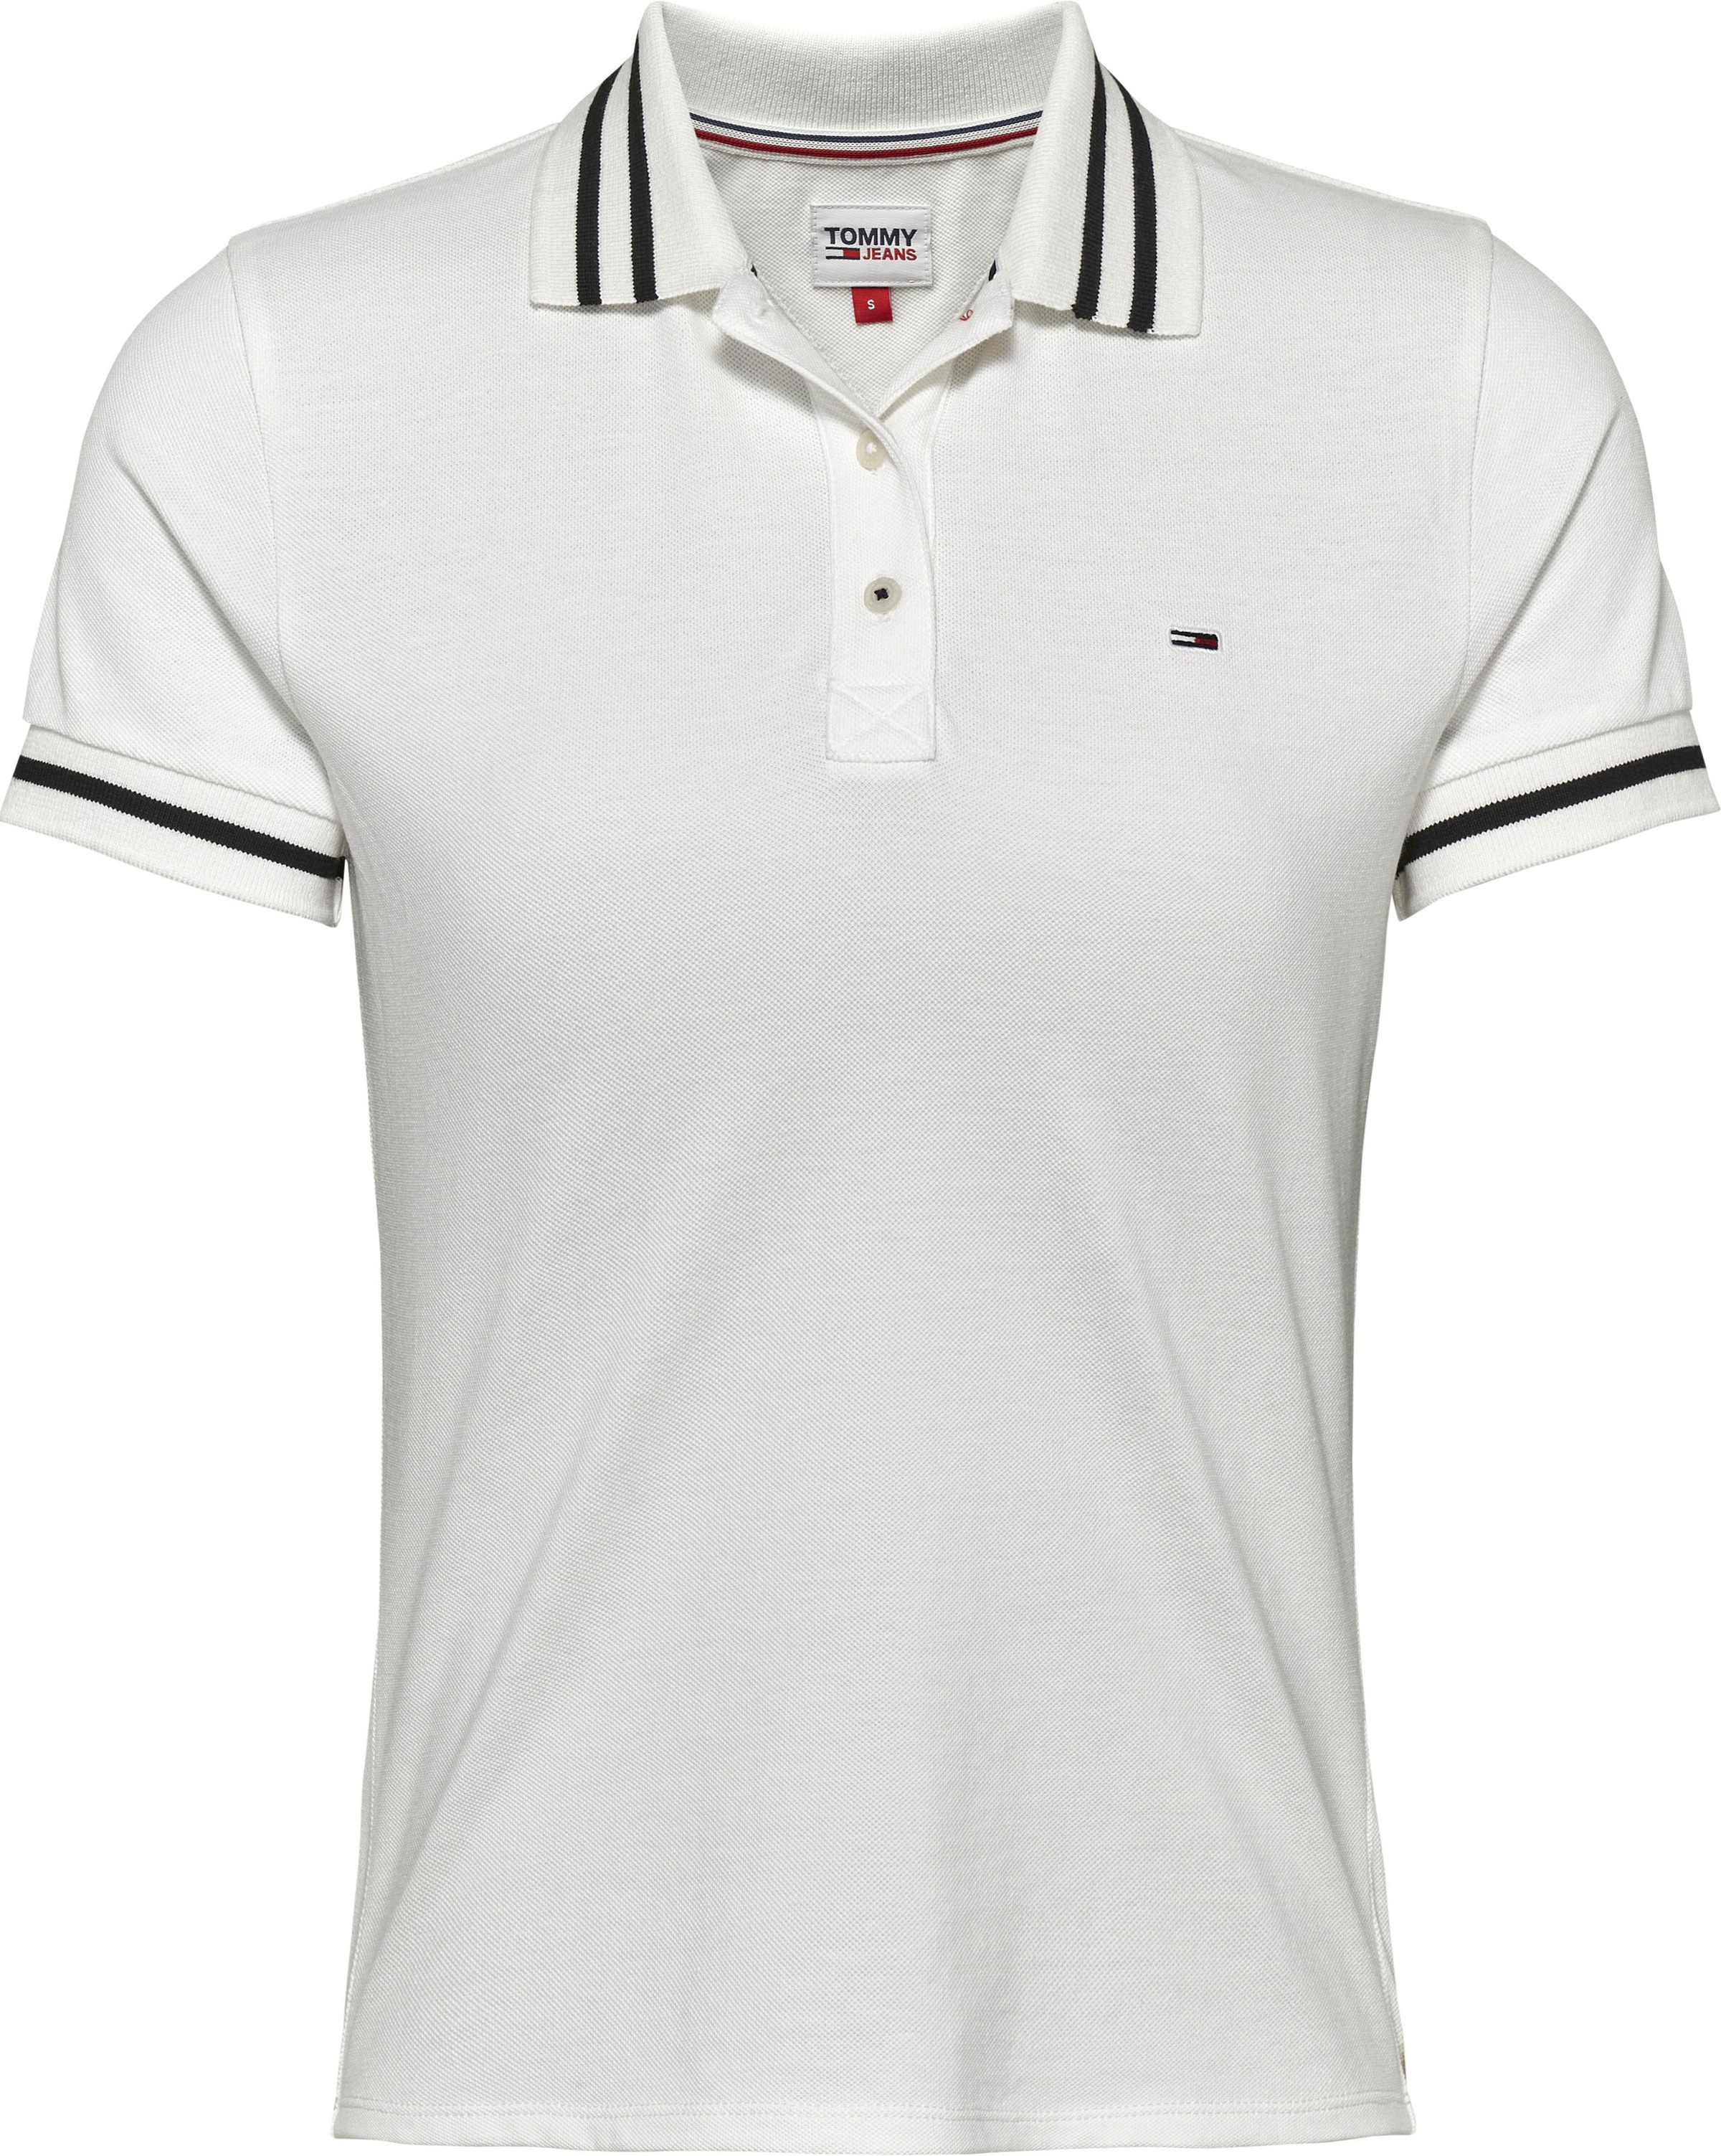 Tommy Jeans TIPPING POLO«, Poloshirt | Kontraststreifen walking mit & »TJW Jeans Tommy ESSENTIAL shoppen Label-Flag I\'m